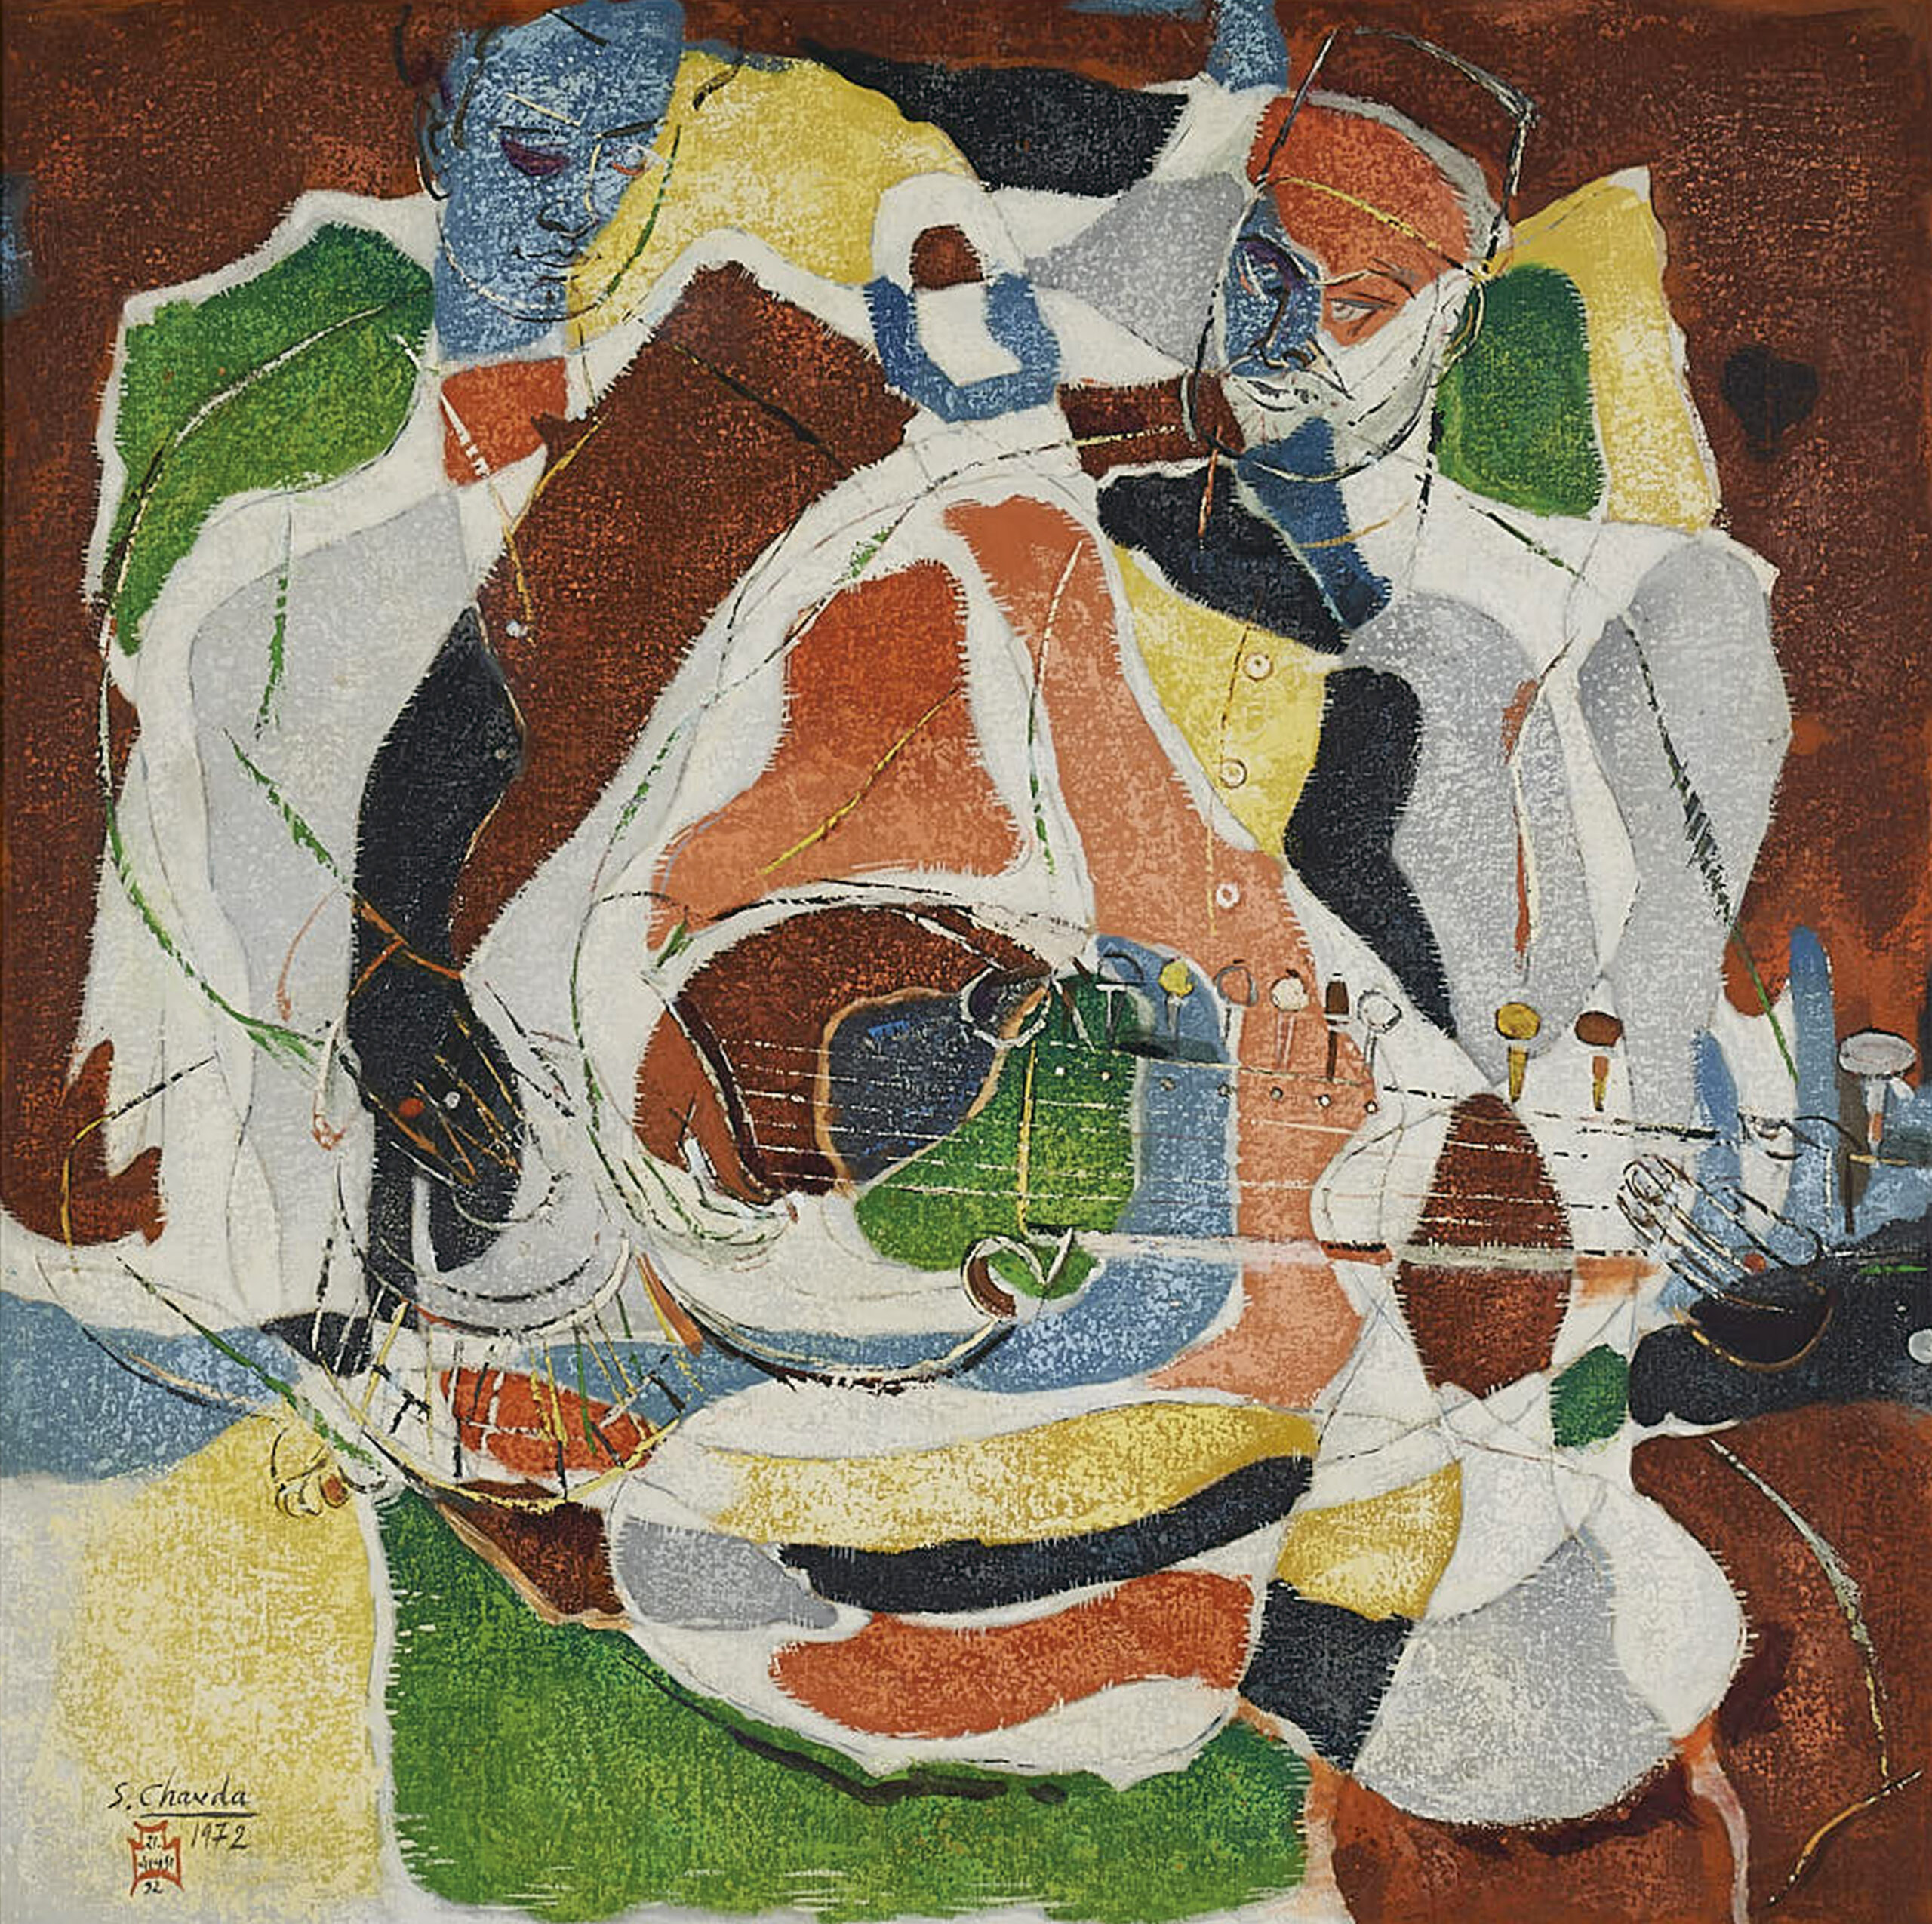 SHAIVAX CHAVDA, Music, Oil on canvas, 1972, 48 x 48 5/8 in.